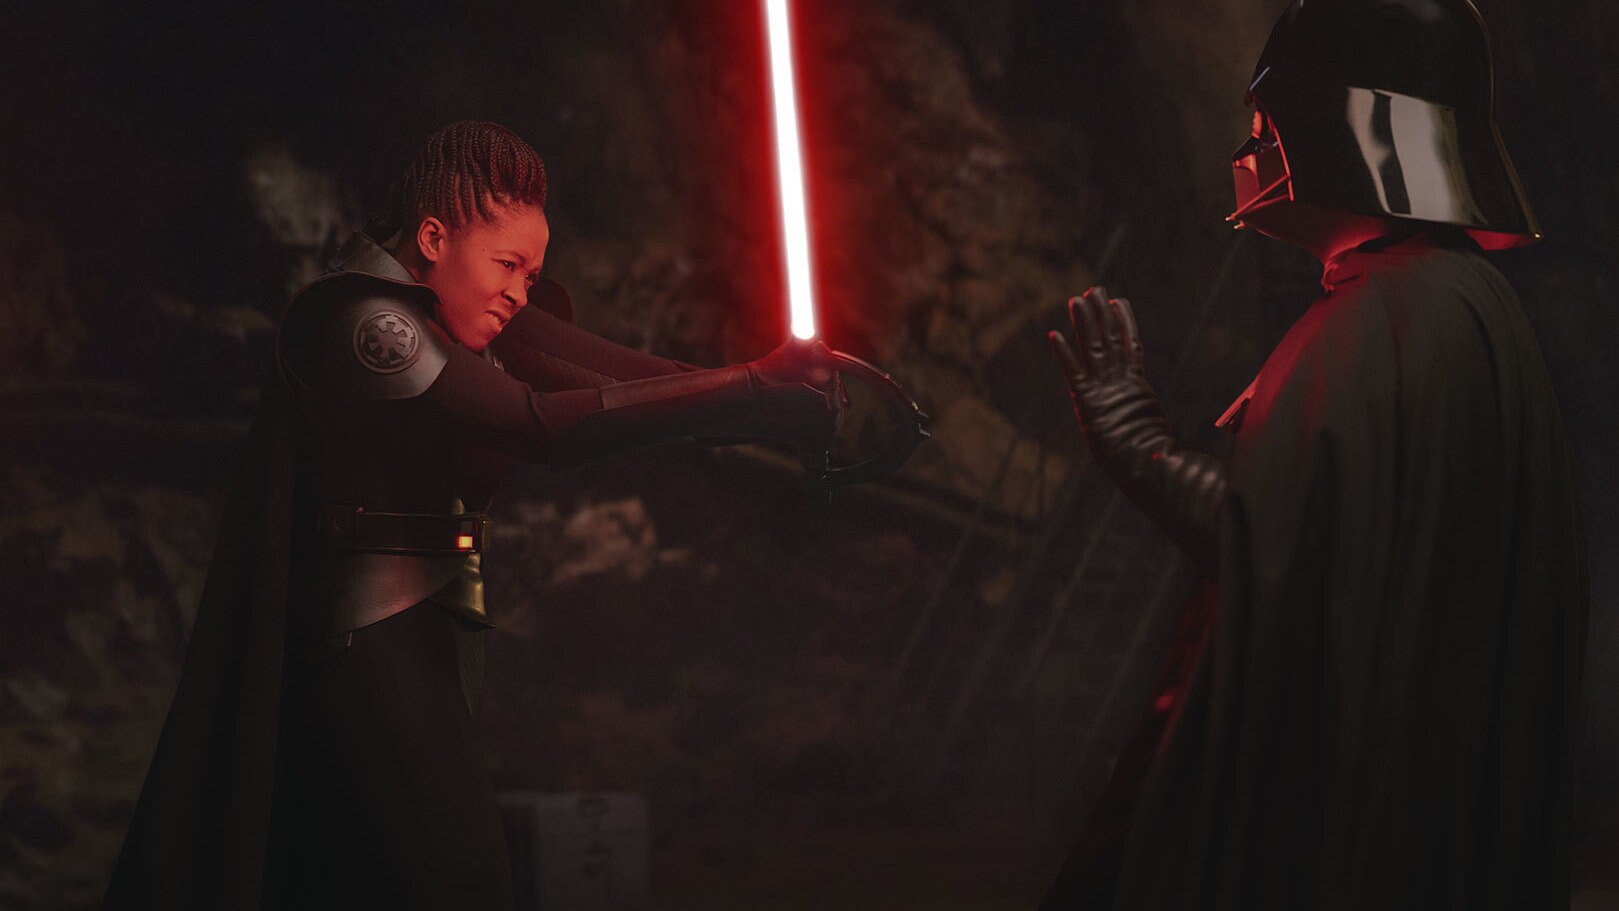 As Vader stews in anger, Reva strikes from behind. But she is no match for the Sith Lord. "Did yo...